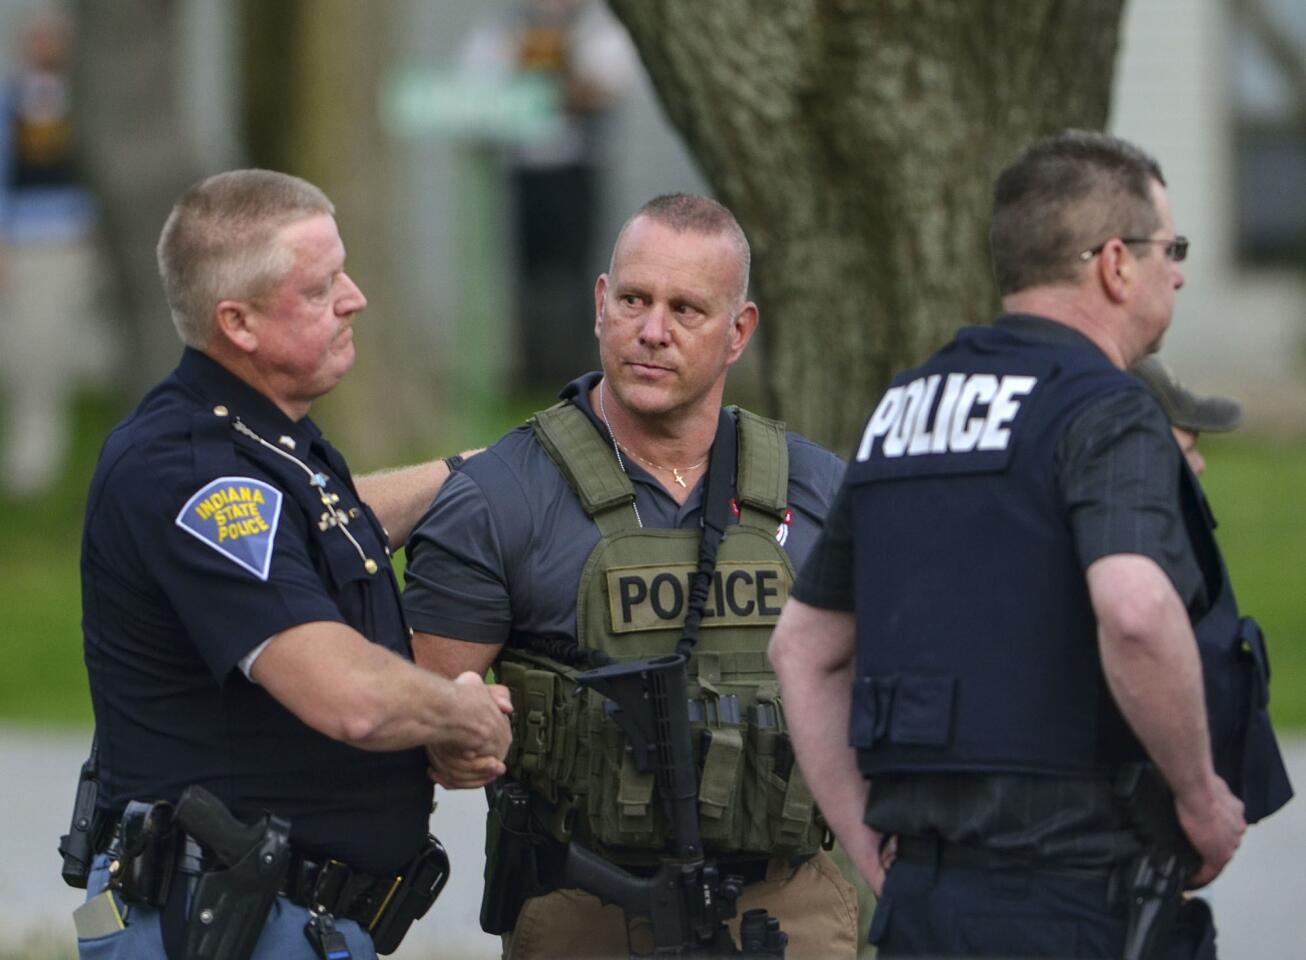 Indiana State Police Sgt. Joe Watts, left, consoles Terre Haute Chief of Police John Plasse, center, at the scene of a fatal shooting of a Terre Haute police officer at an apartment building May 4, 2018, in Terre Haute, Ind.